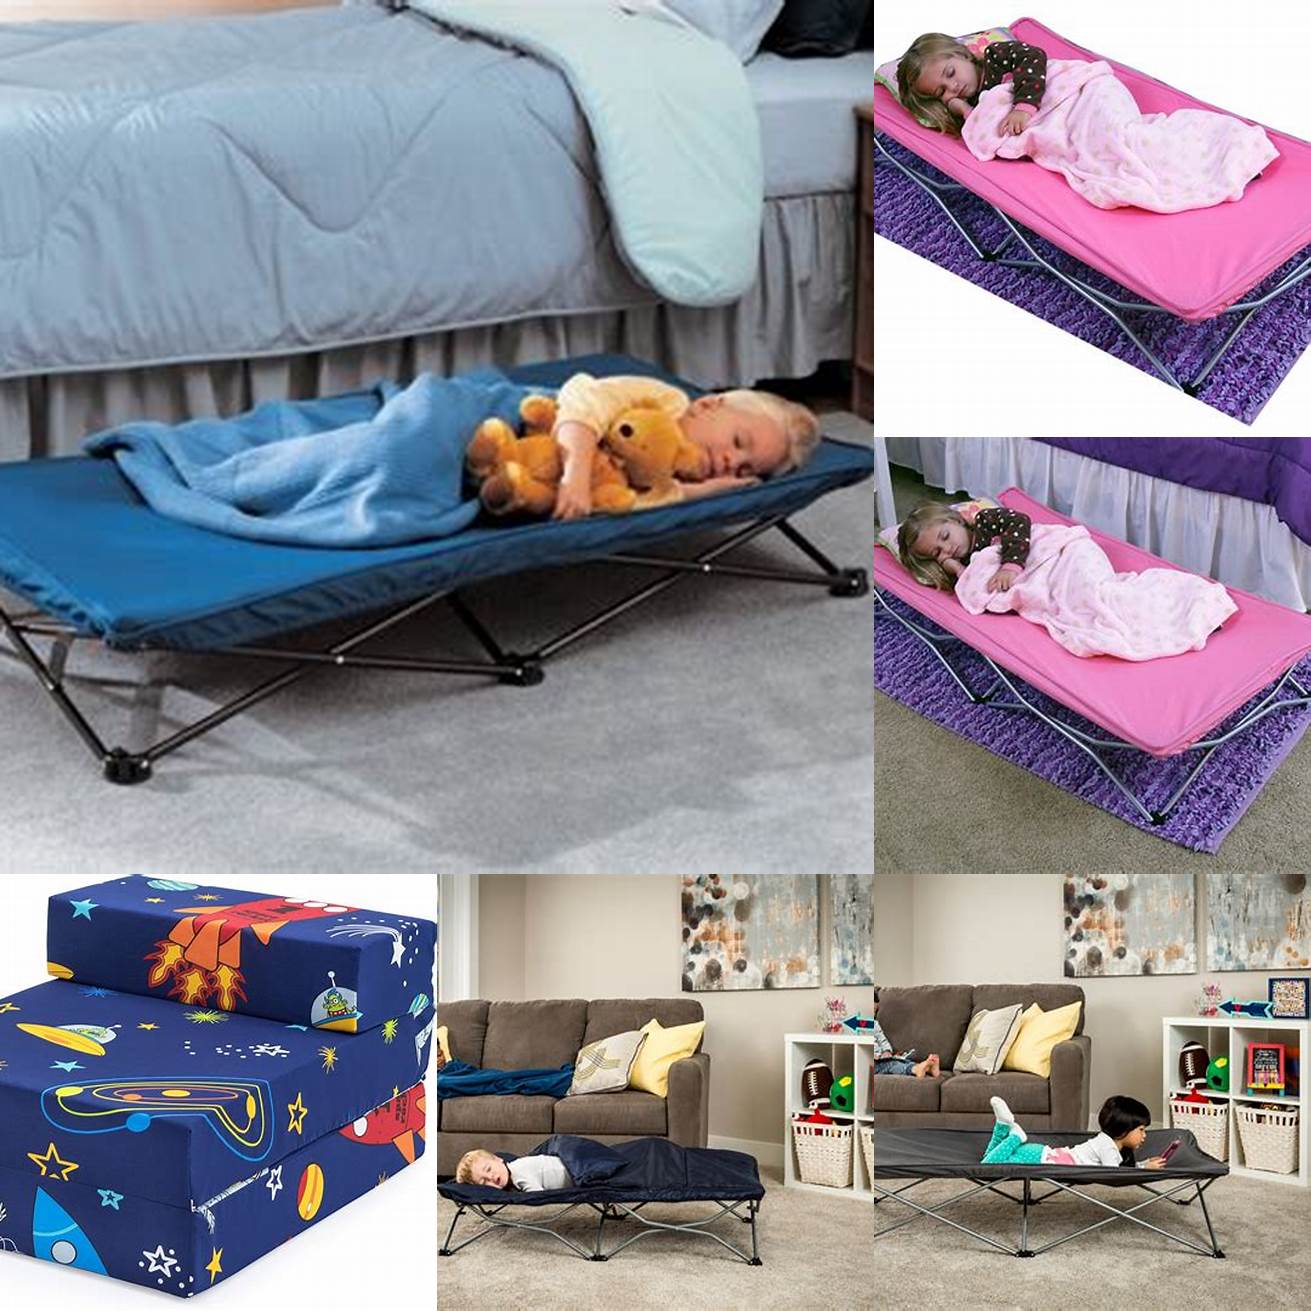 Portable bed for kids